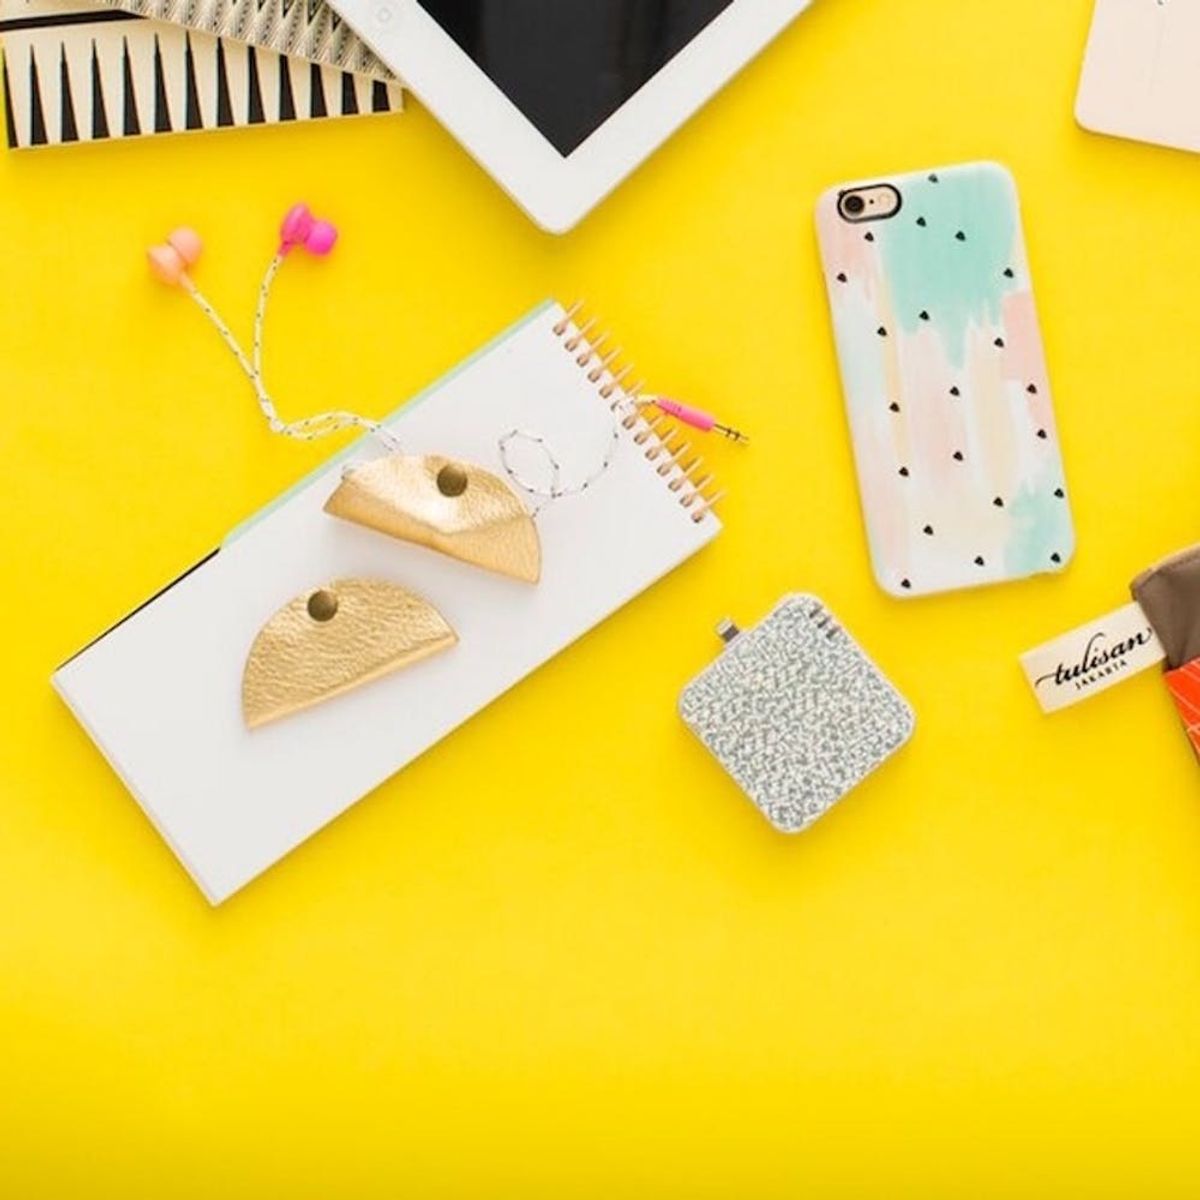 16 Must-Have 2015 Gifts Trends to Treat Yo’ Self to Before It’s Too Late